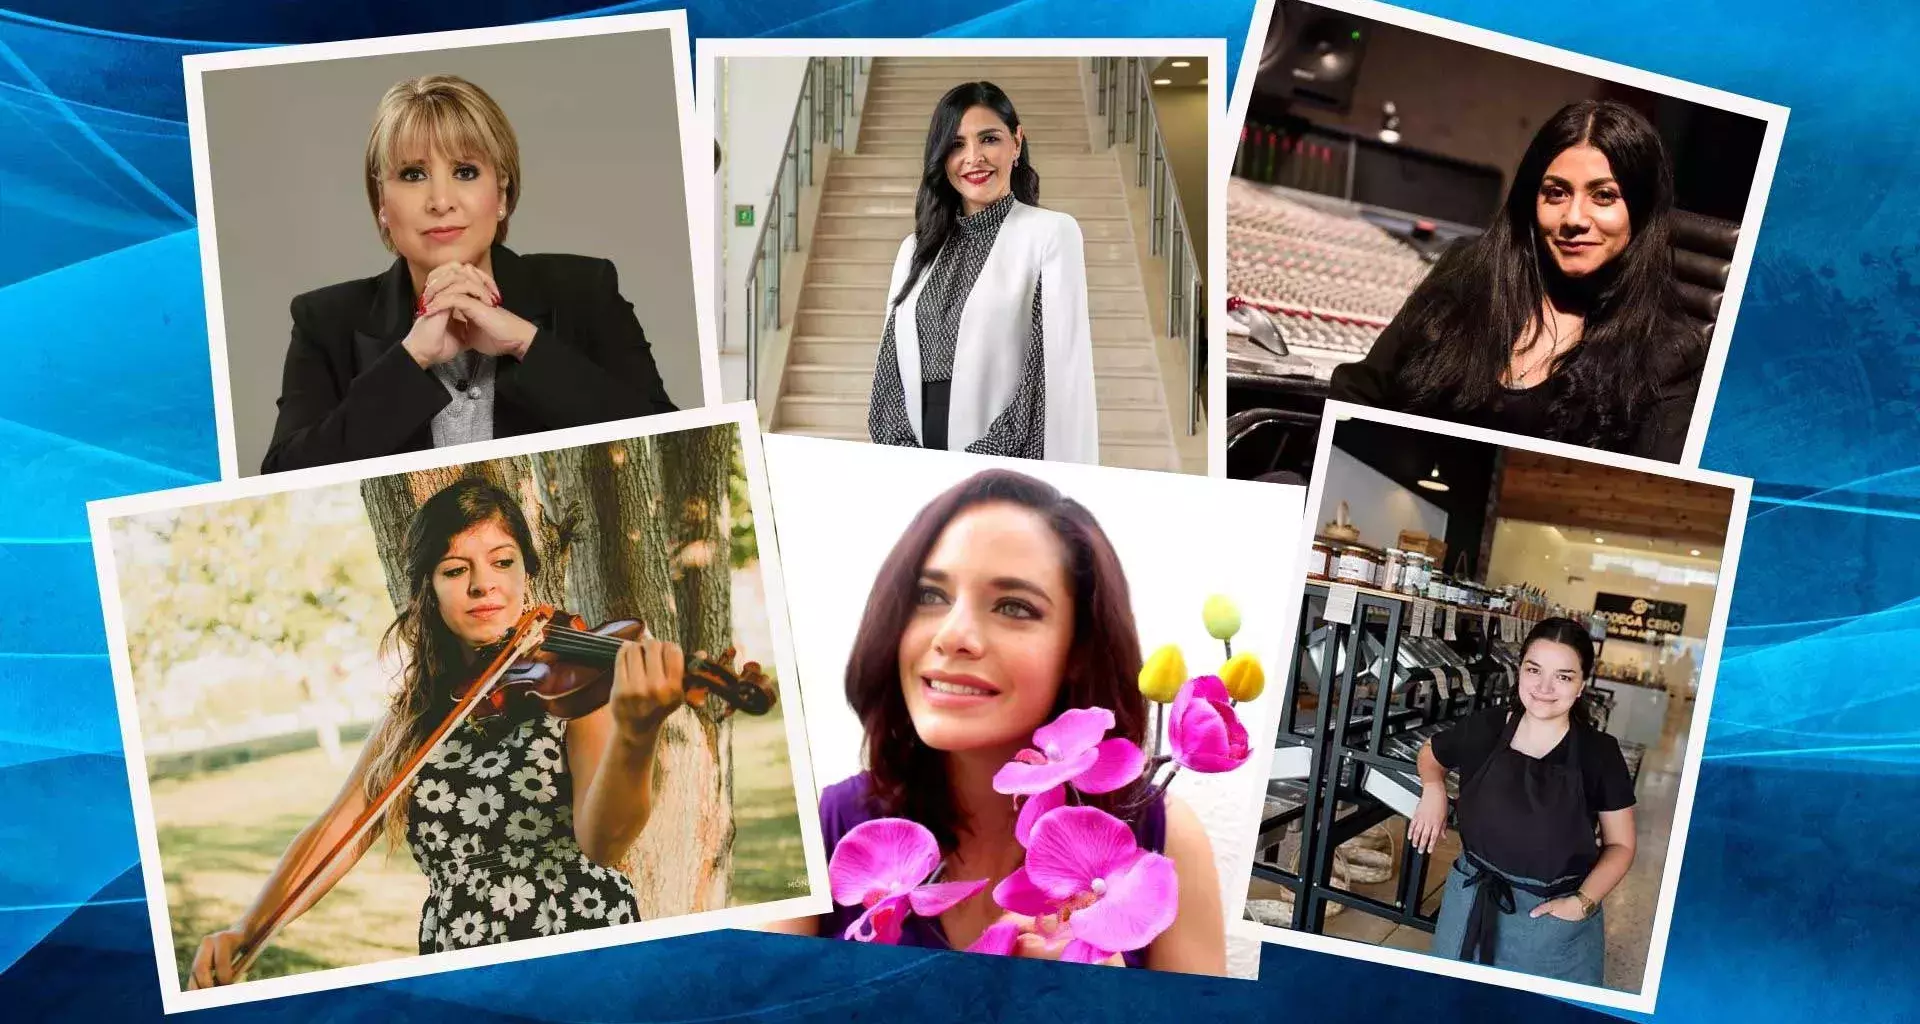 Inspiring and empowering! The winners of the Mujer Tec 2021 Awards